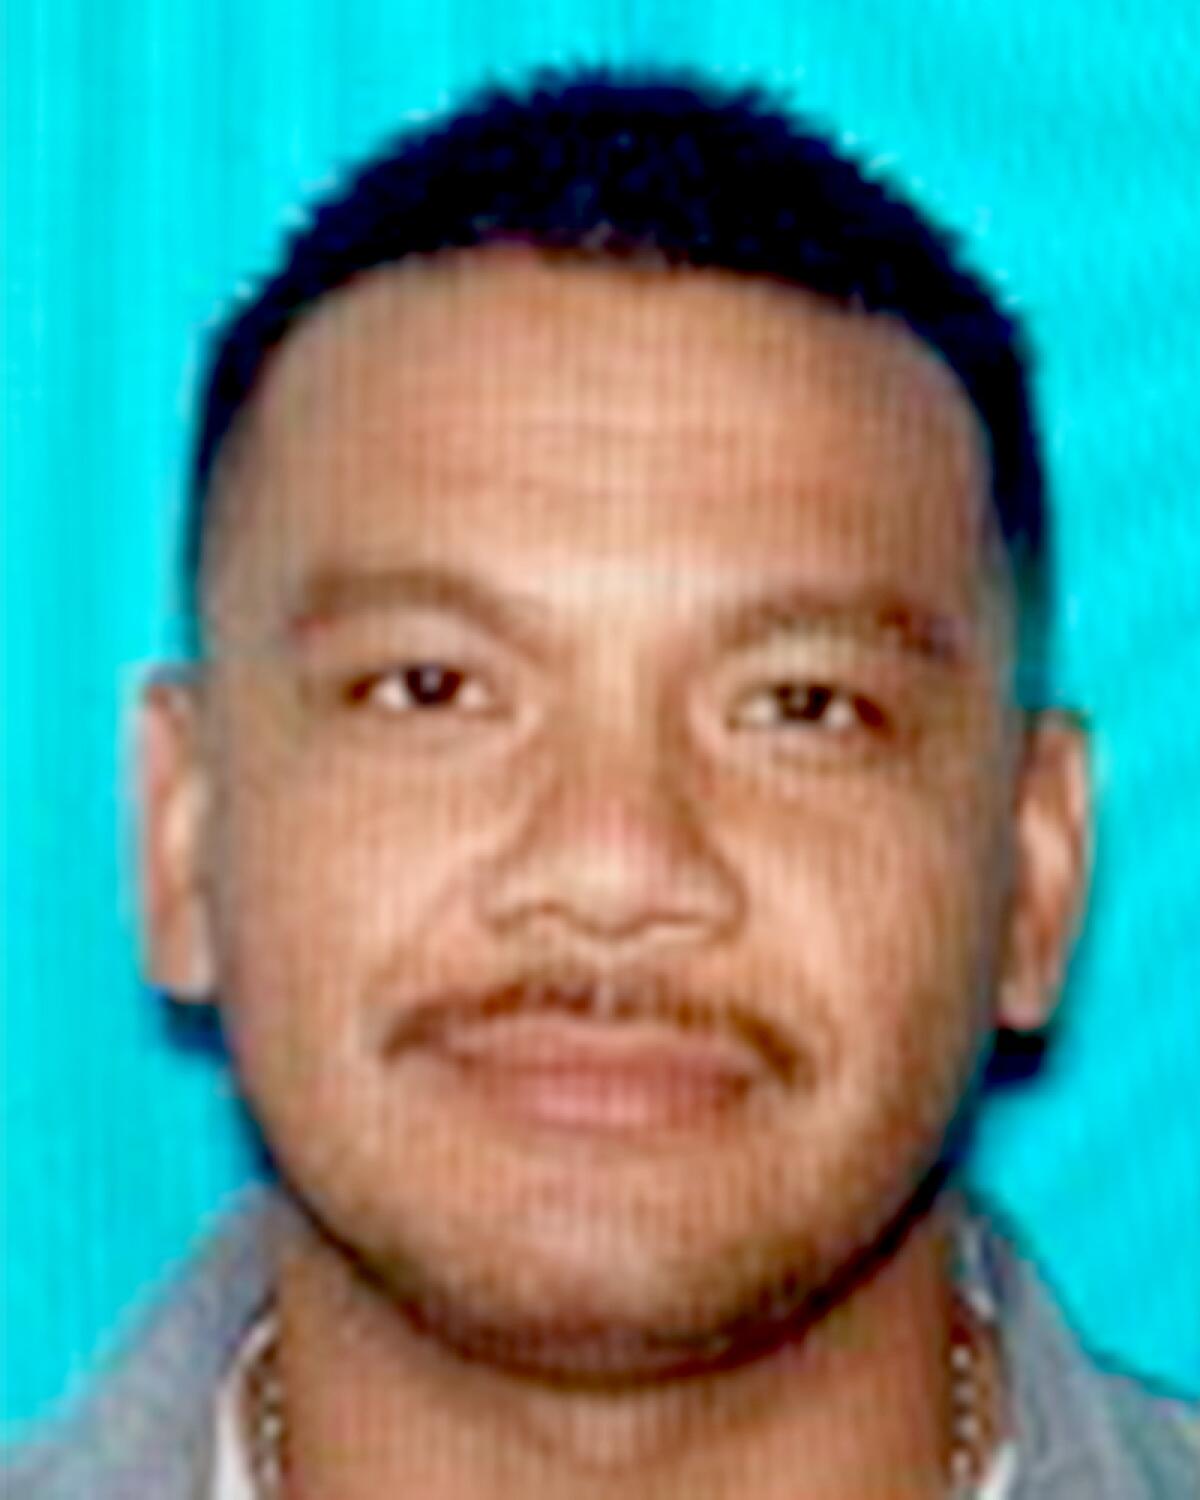 Police are searching for Christopher Marquez, a 36-year-old San Diego man, who is believed to be armed and dangerous.